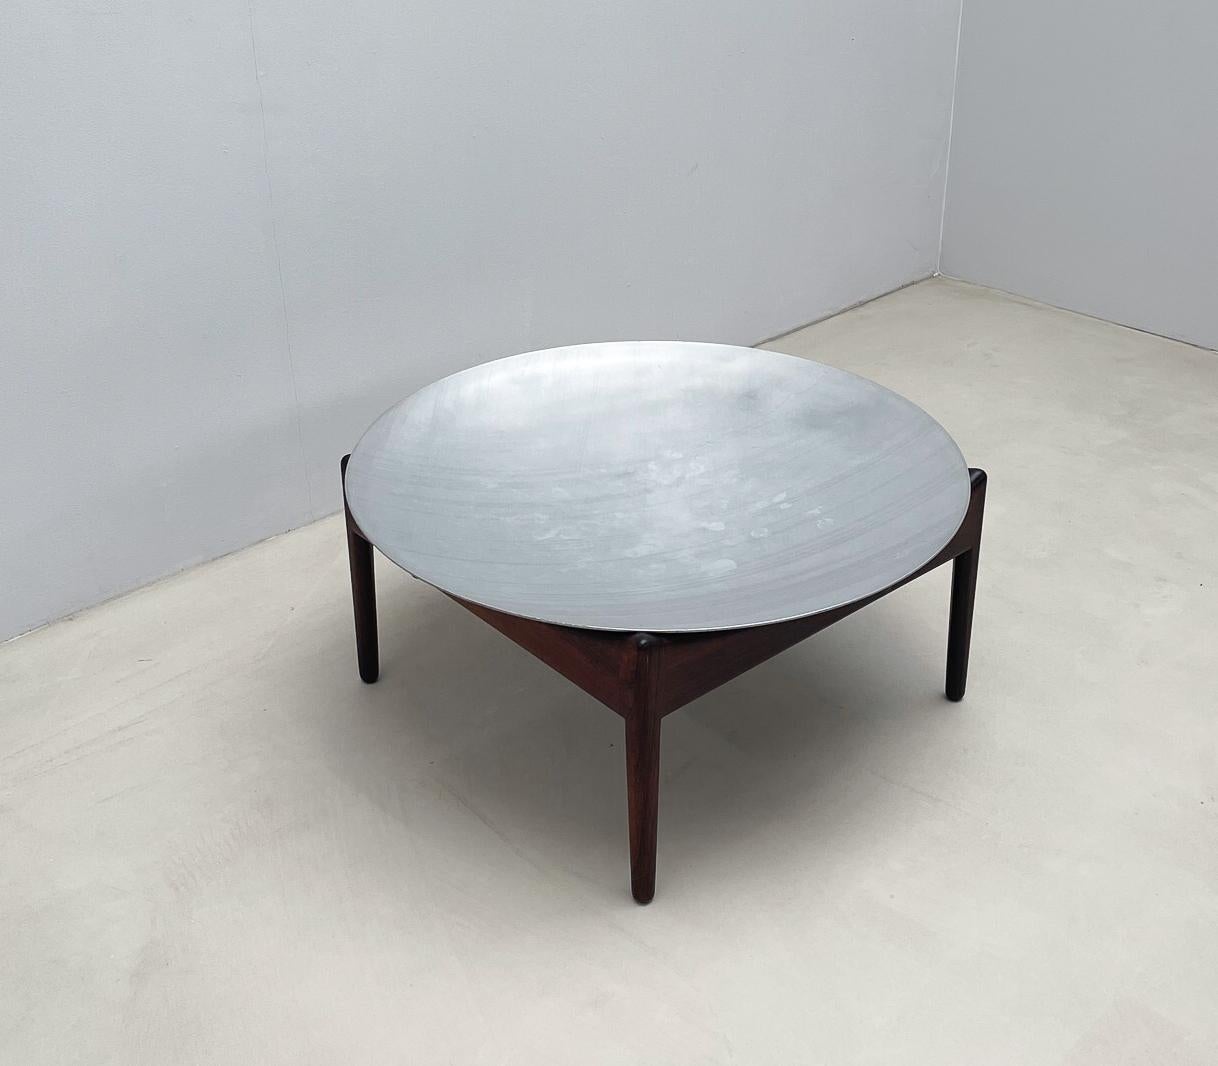 Late 20th Century Mid-Century Modern Coffee Table, Wood and Chrome, Italy, 1970s For Sale